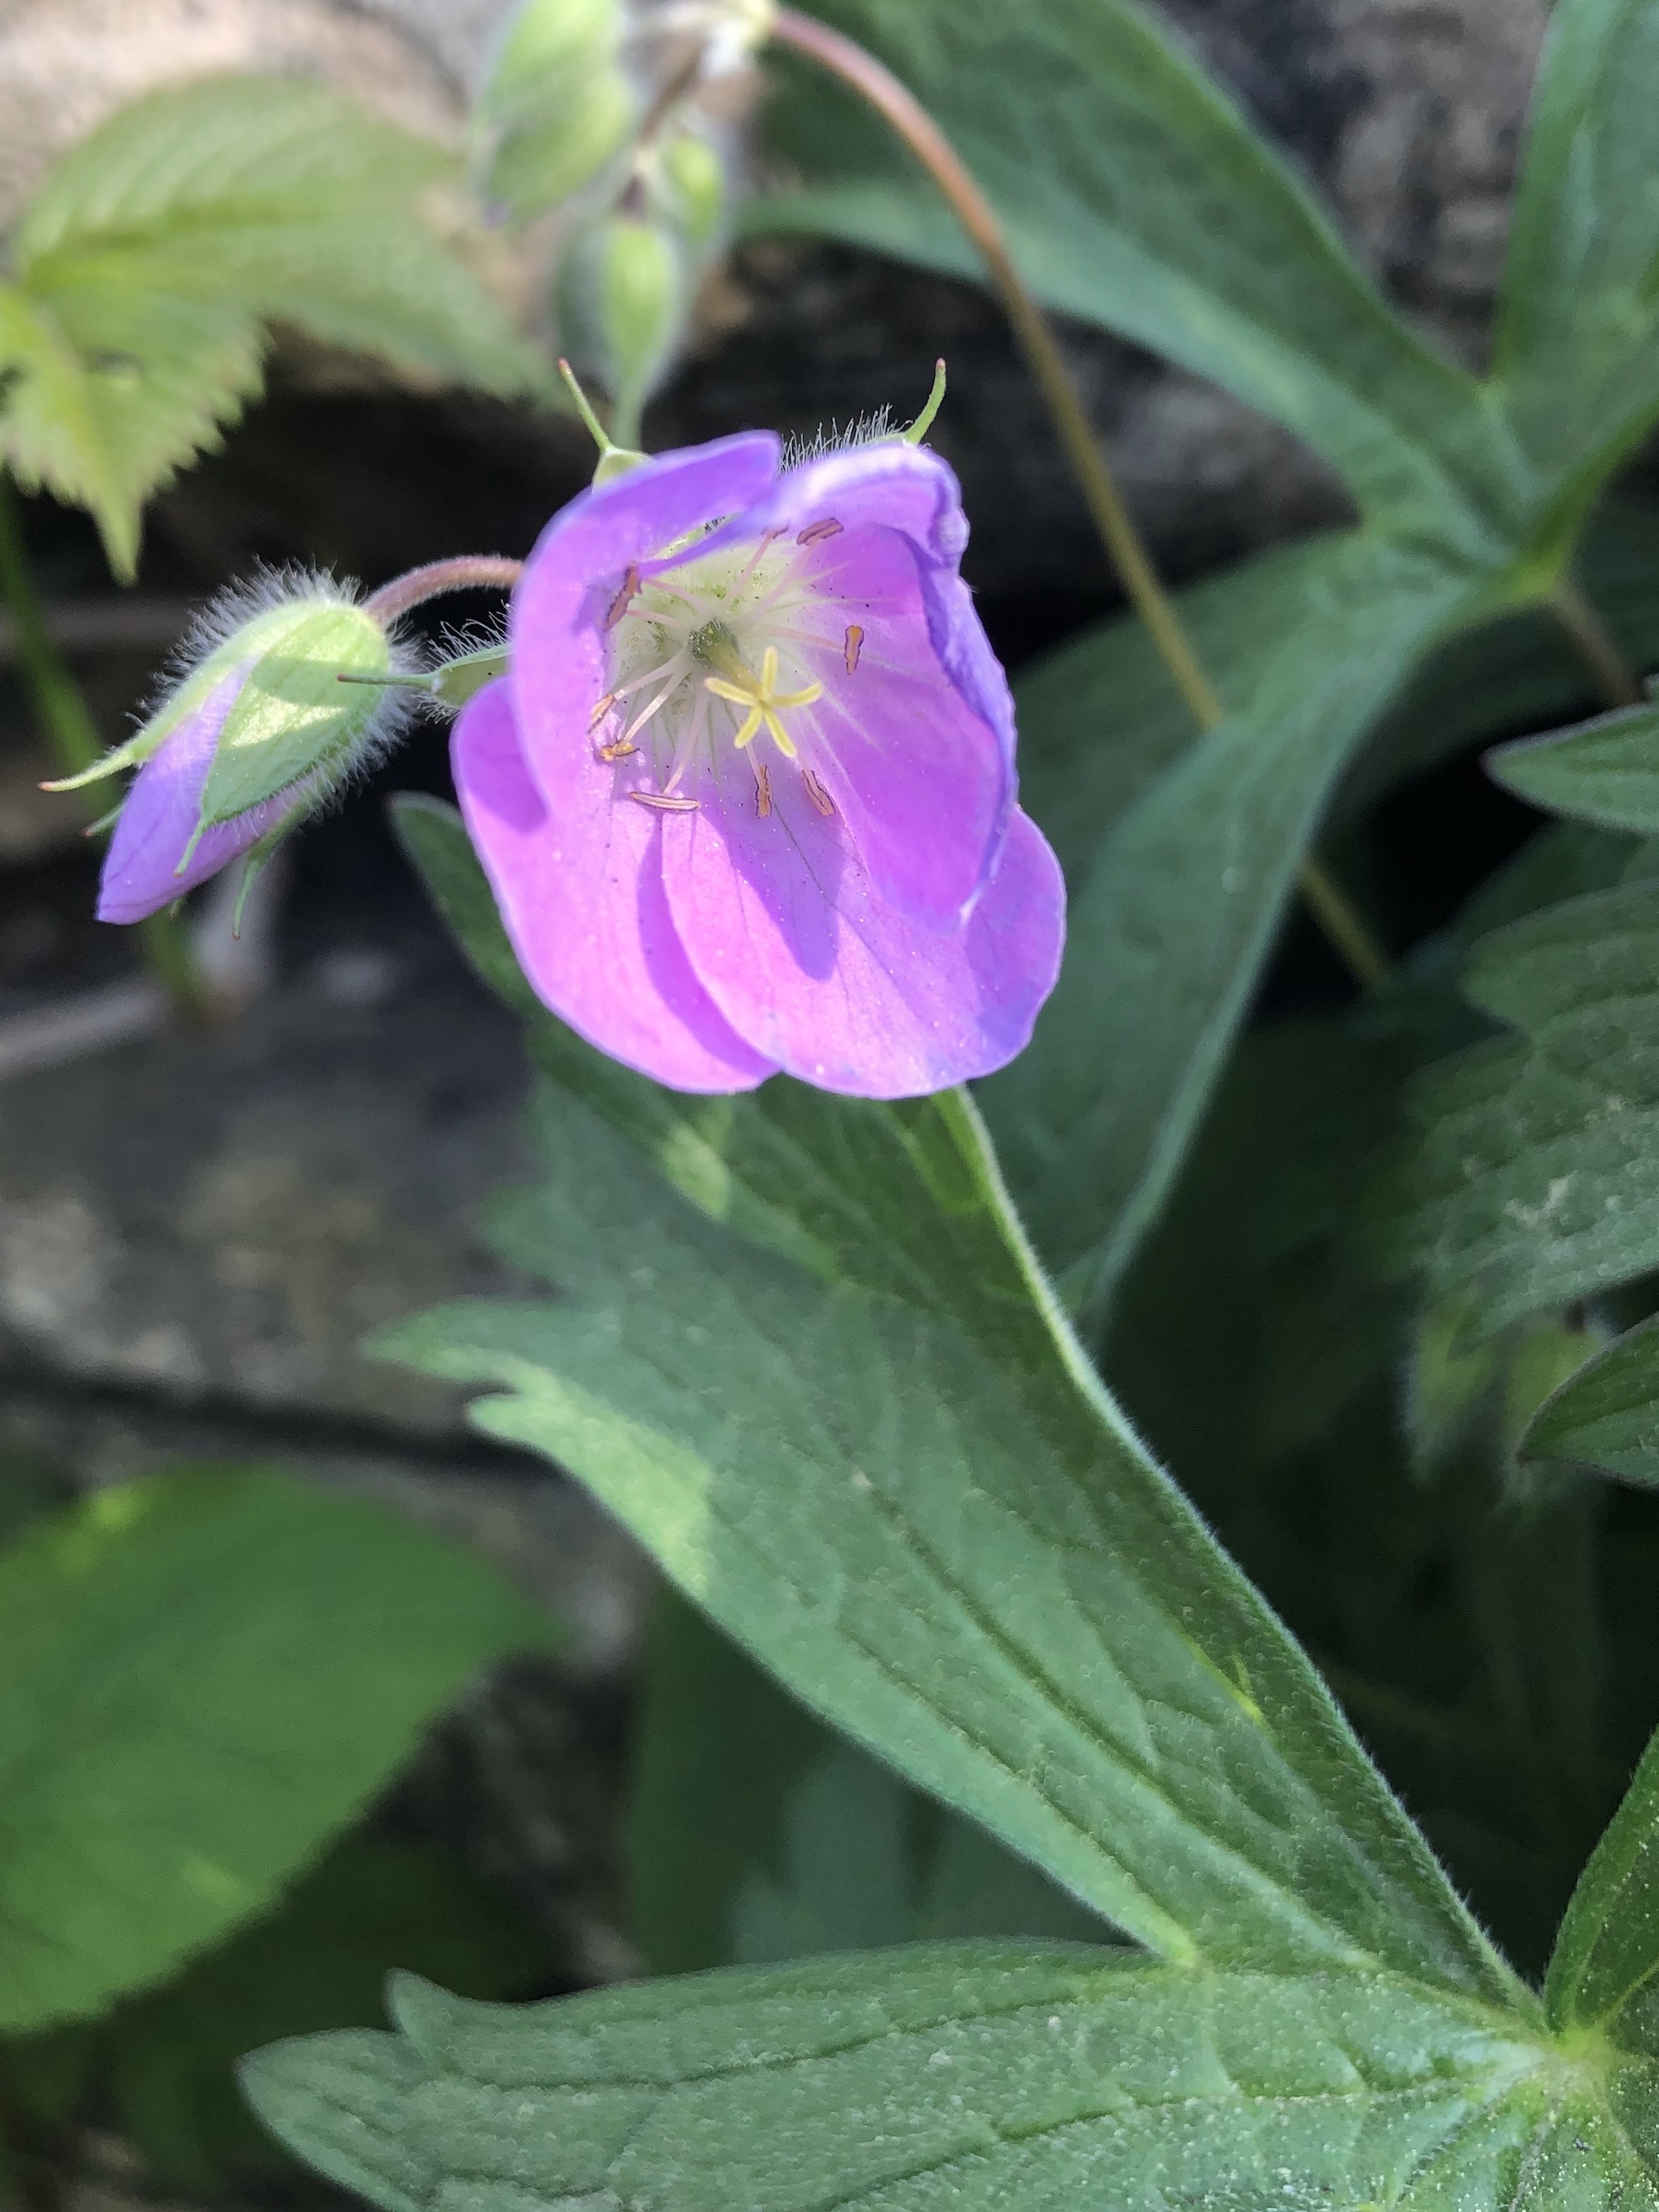 Wild Geranium by Council Ring in Oak Savanna on May 2, 2021.